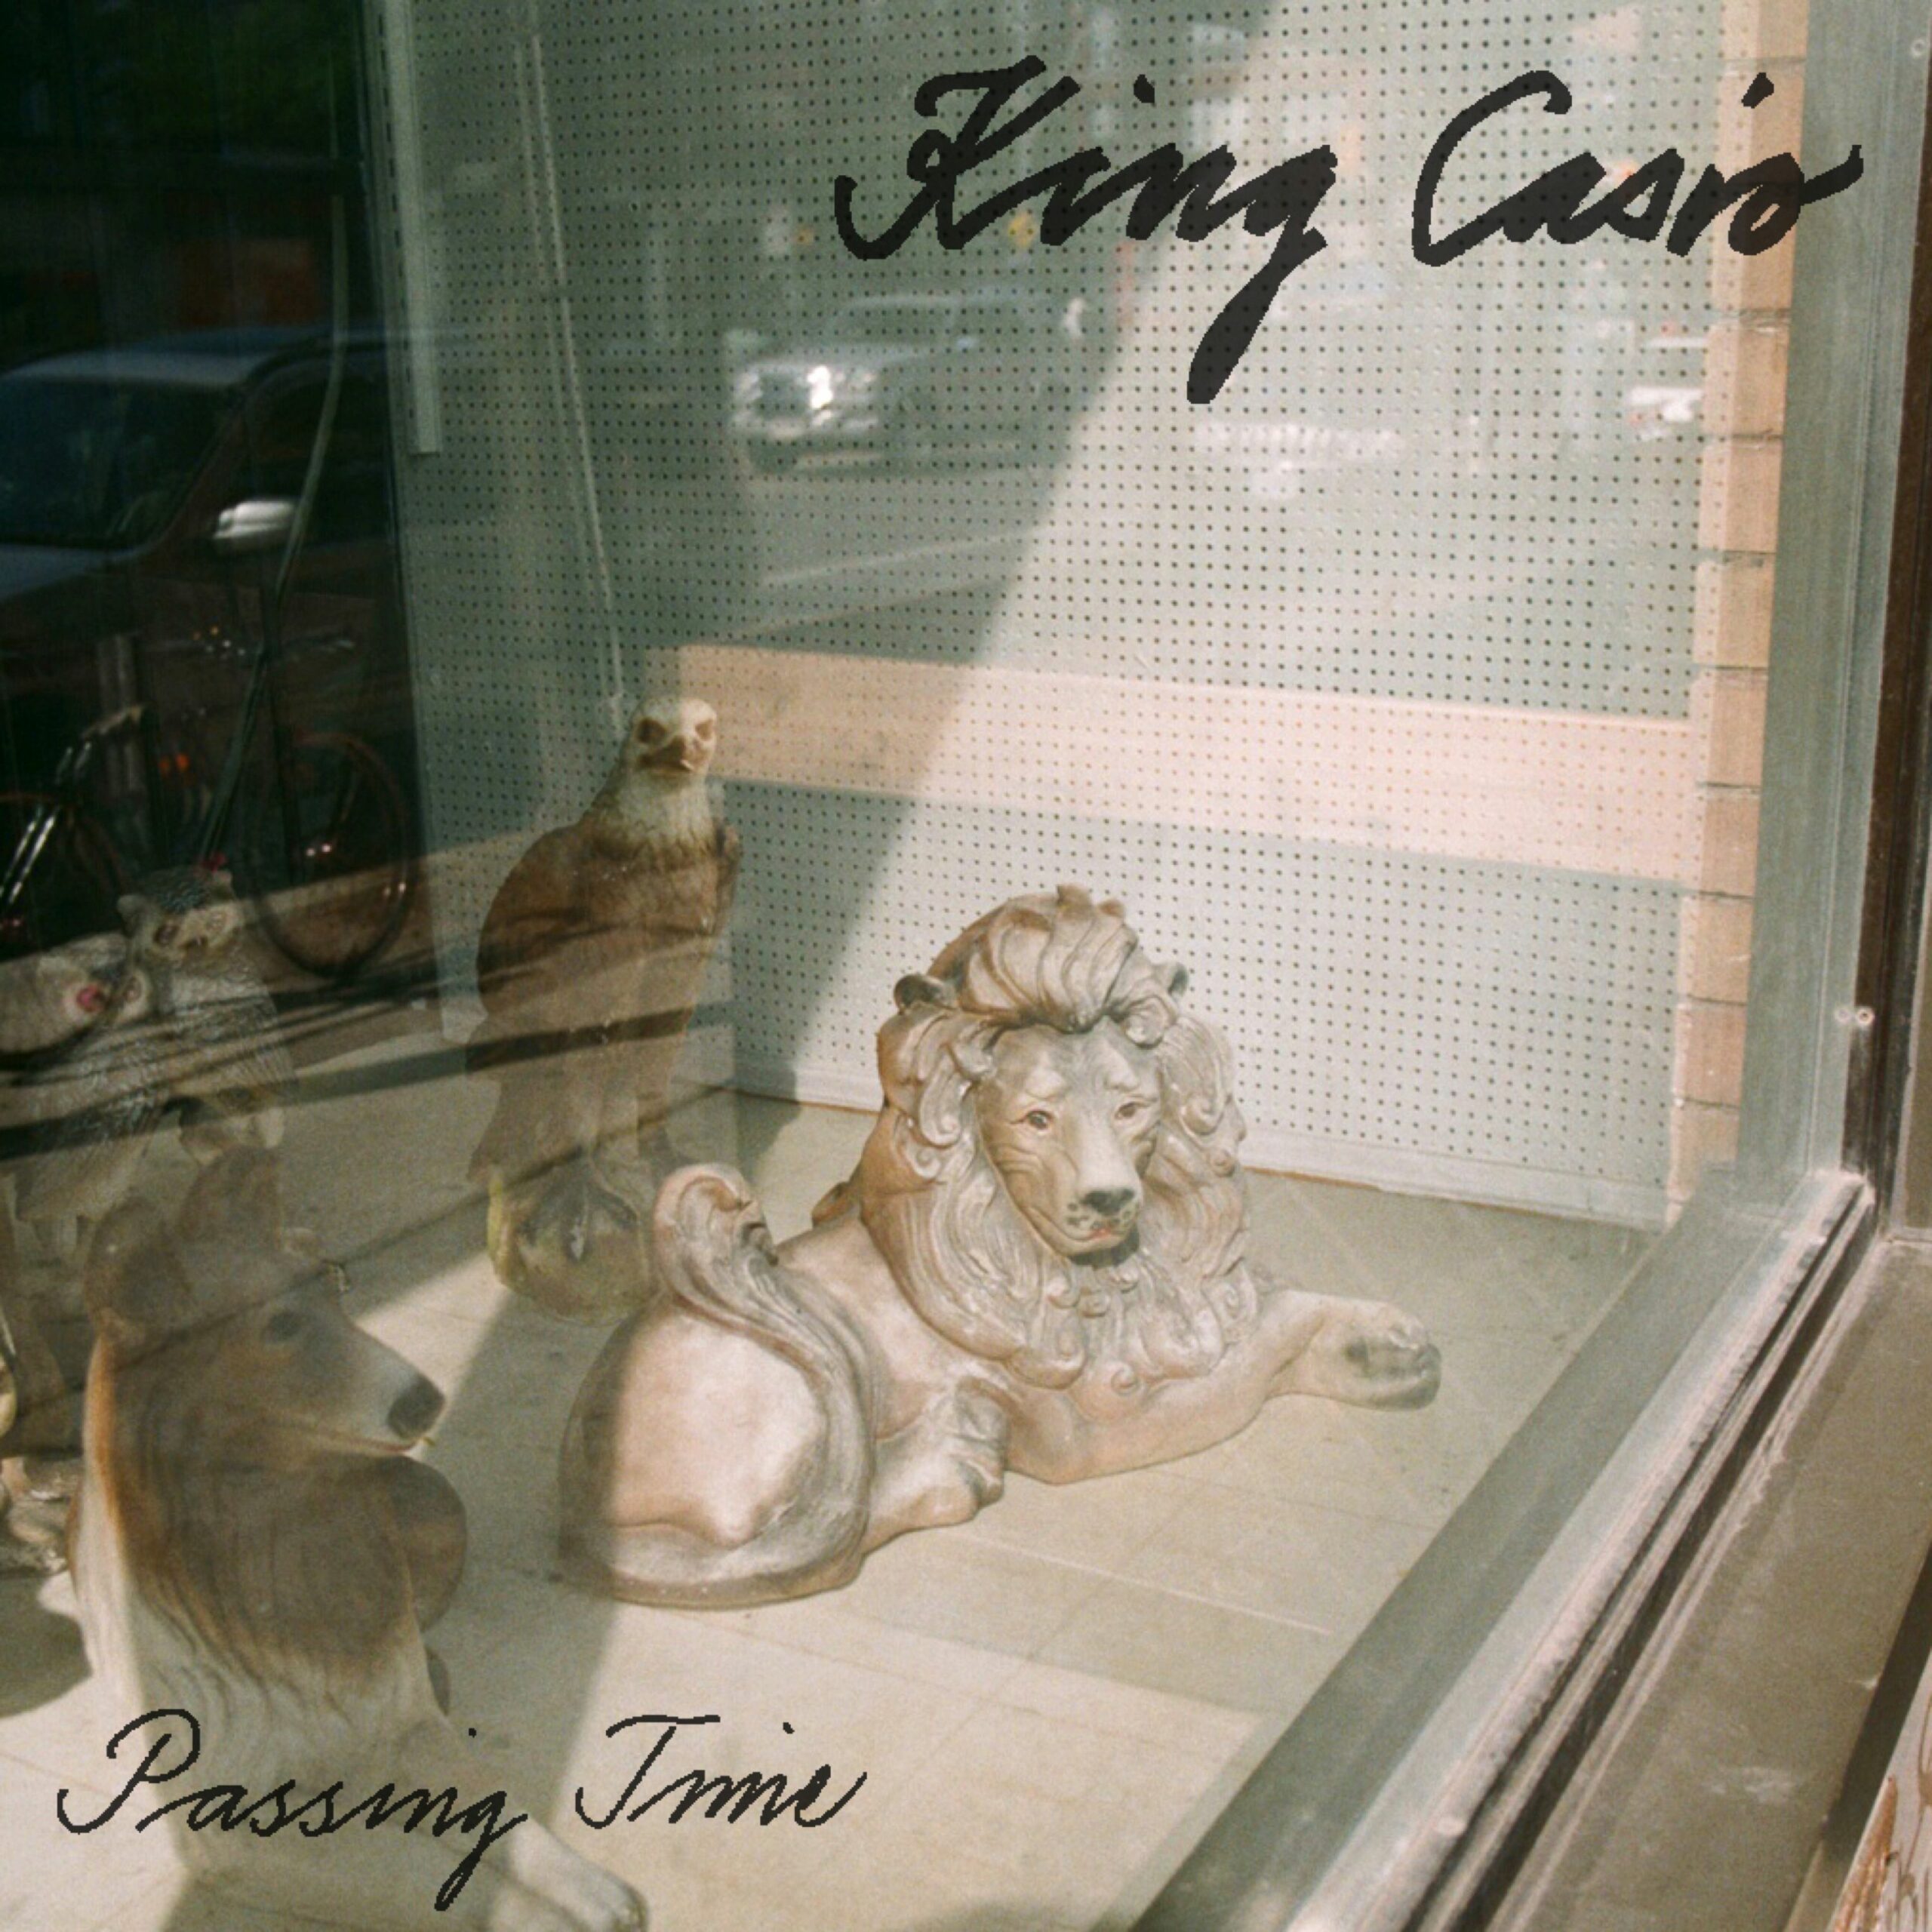 EXCLUSIVE PREMIERE: King Casio release new video and single ‘Passing Time’